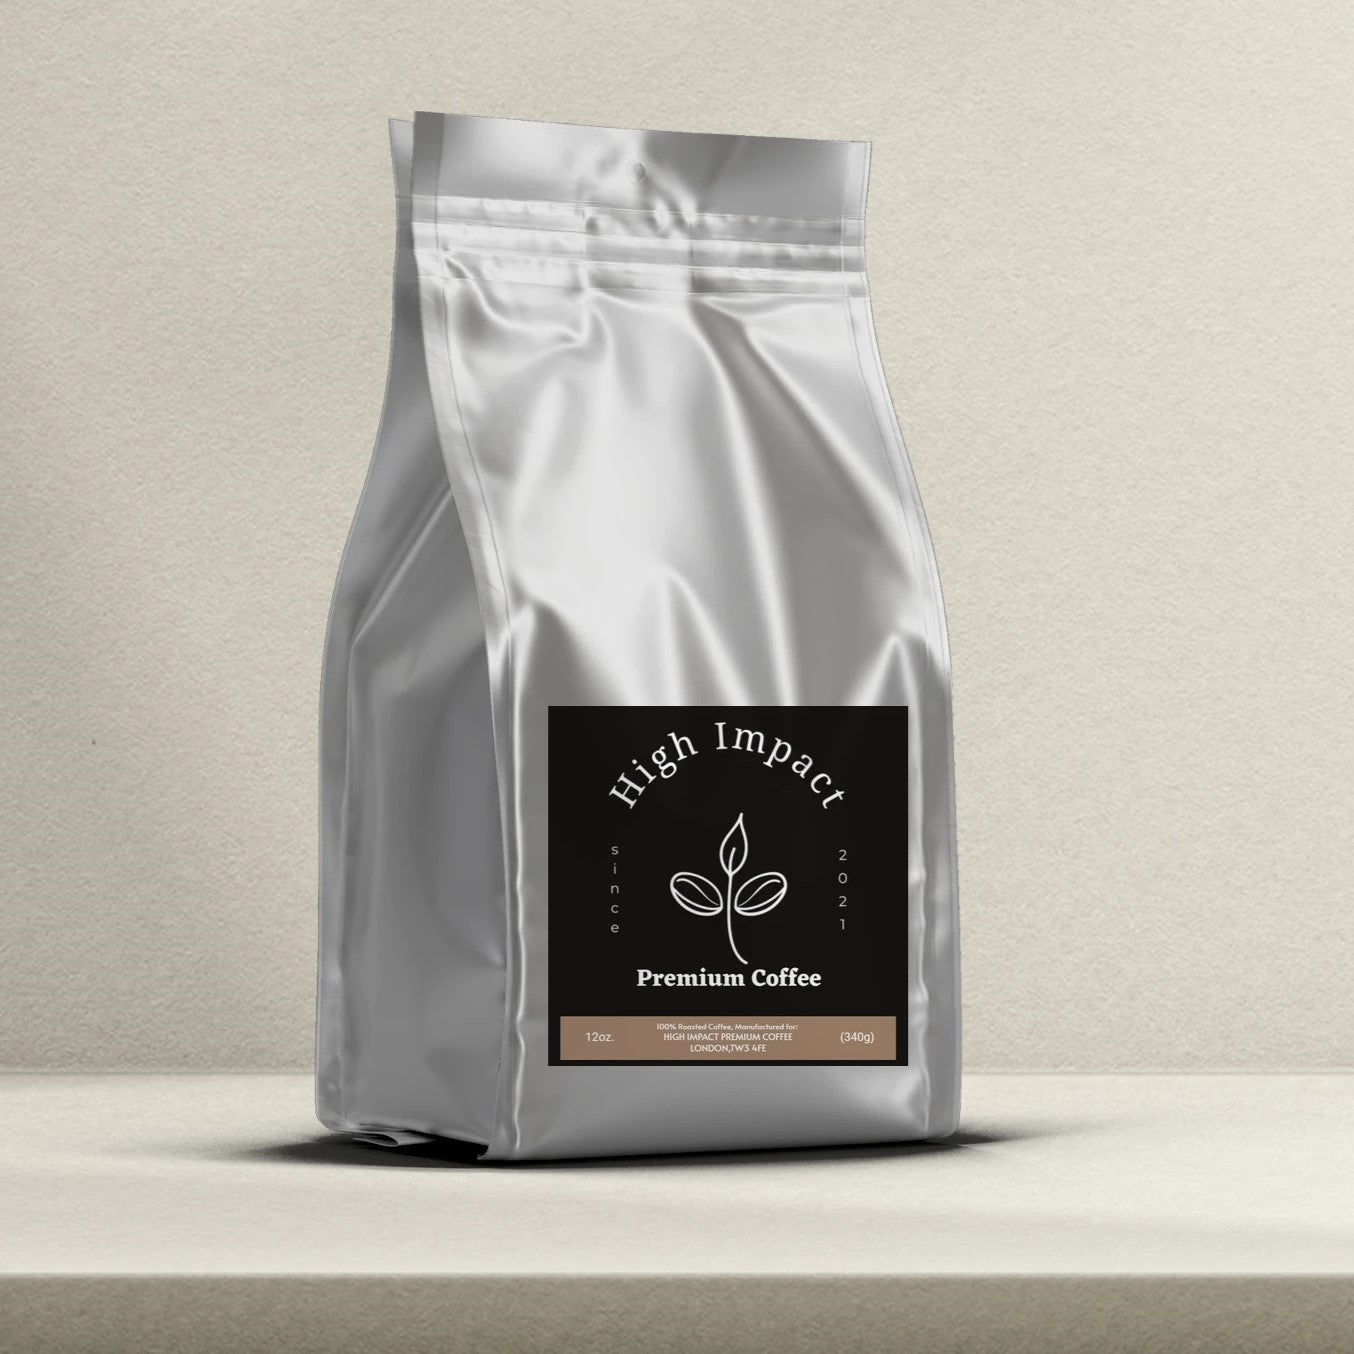 https://highimpactcoffee.com/collections/decaf-low-acid